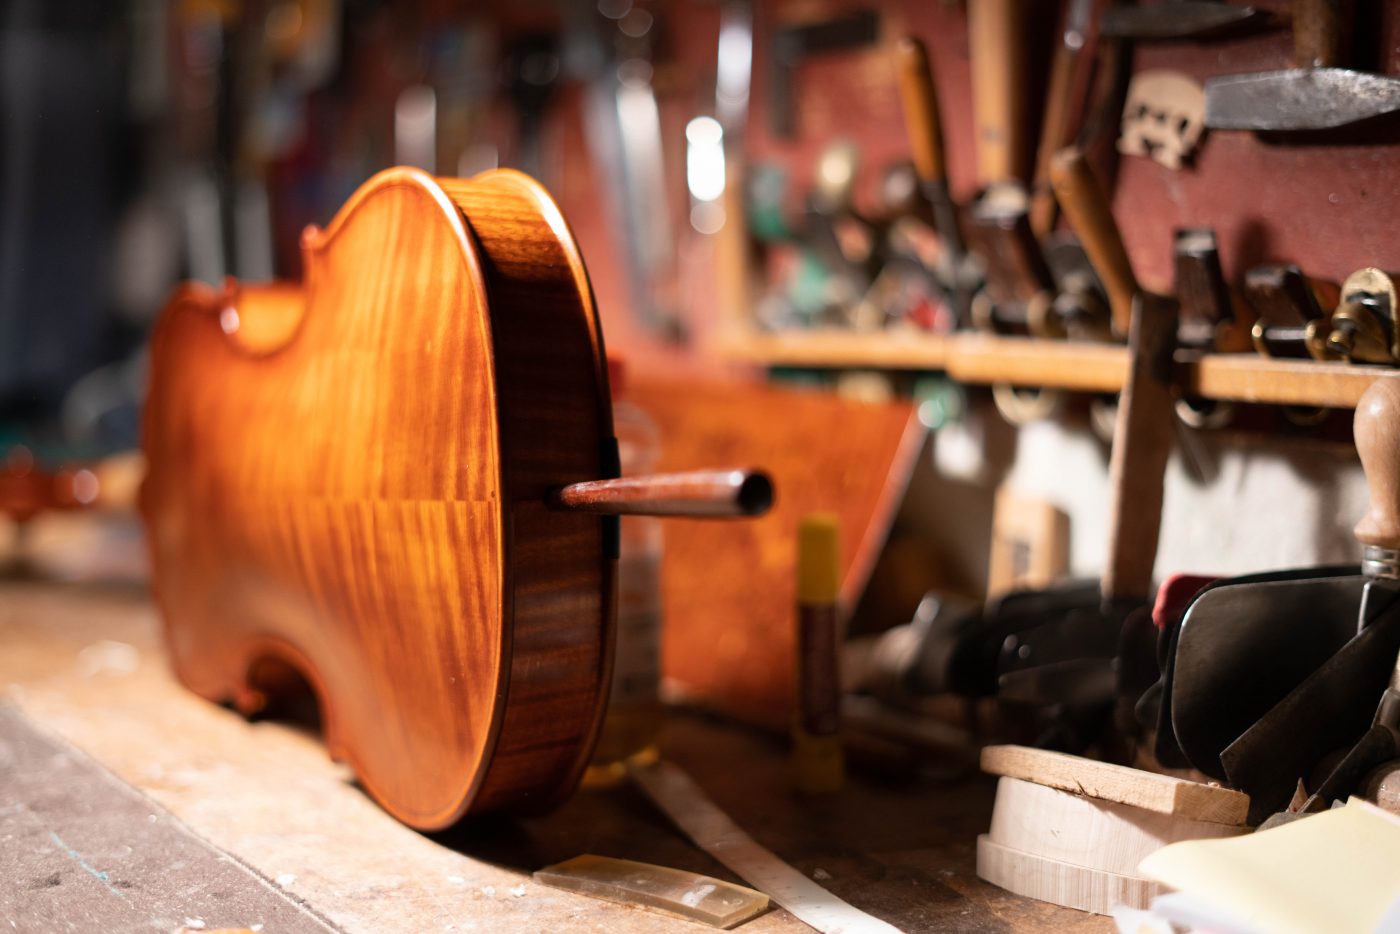 UNESCO violin making tradition workshop in Cremona, Lombardy, Lombardia